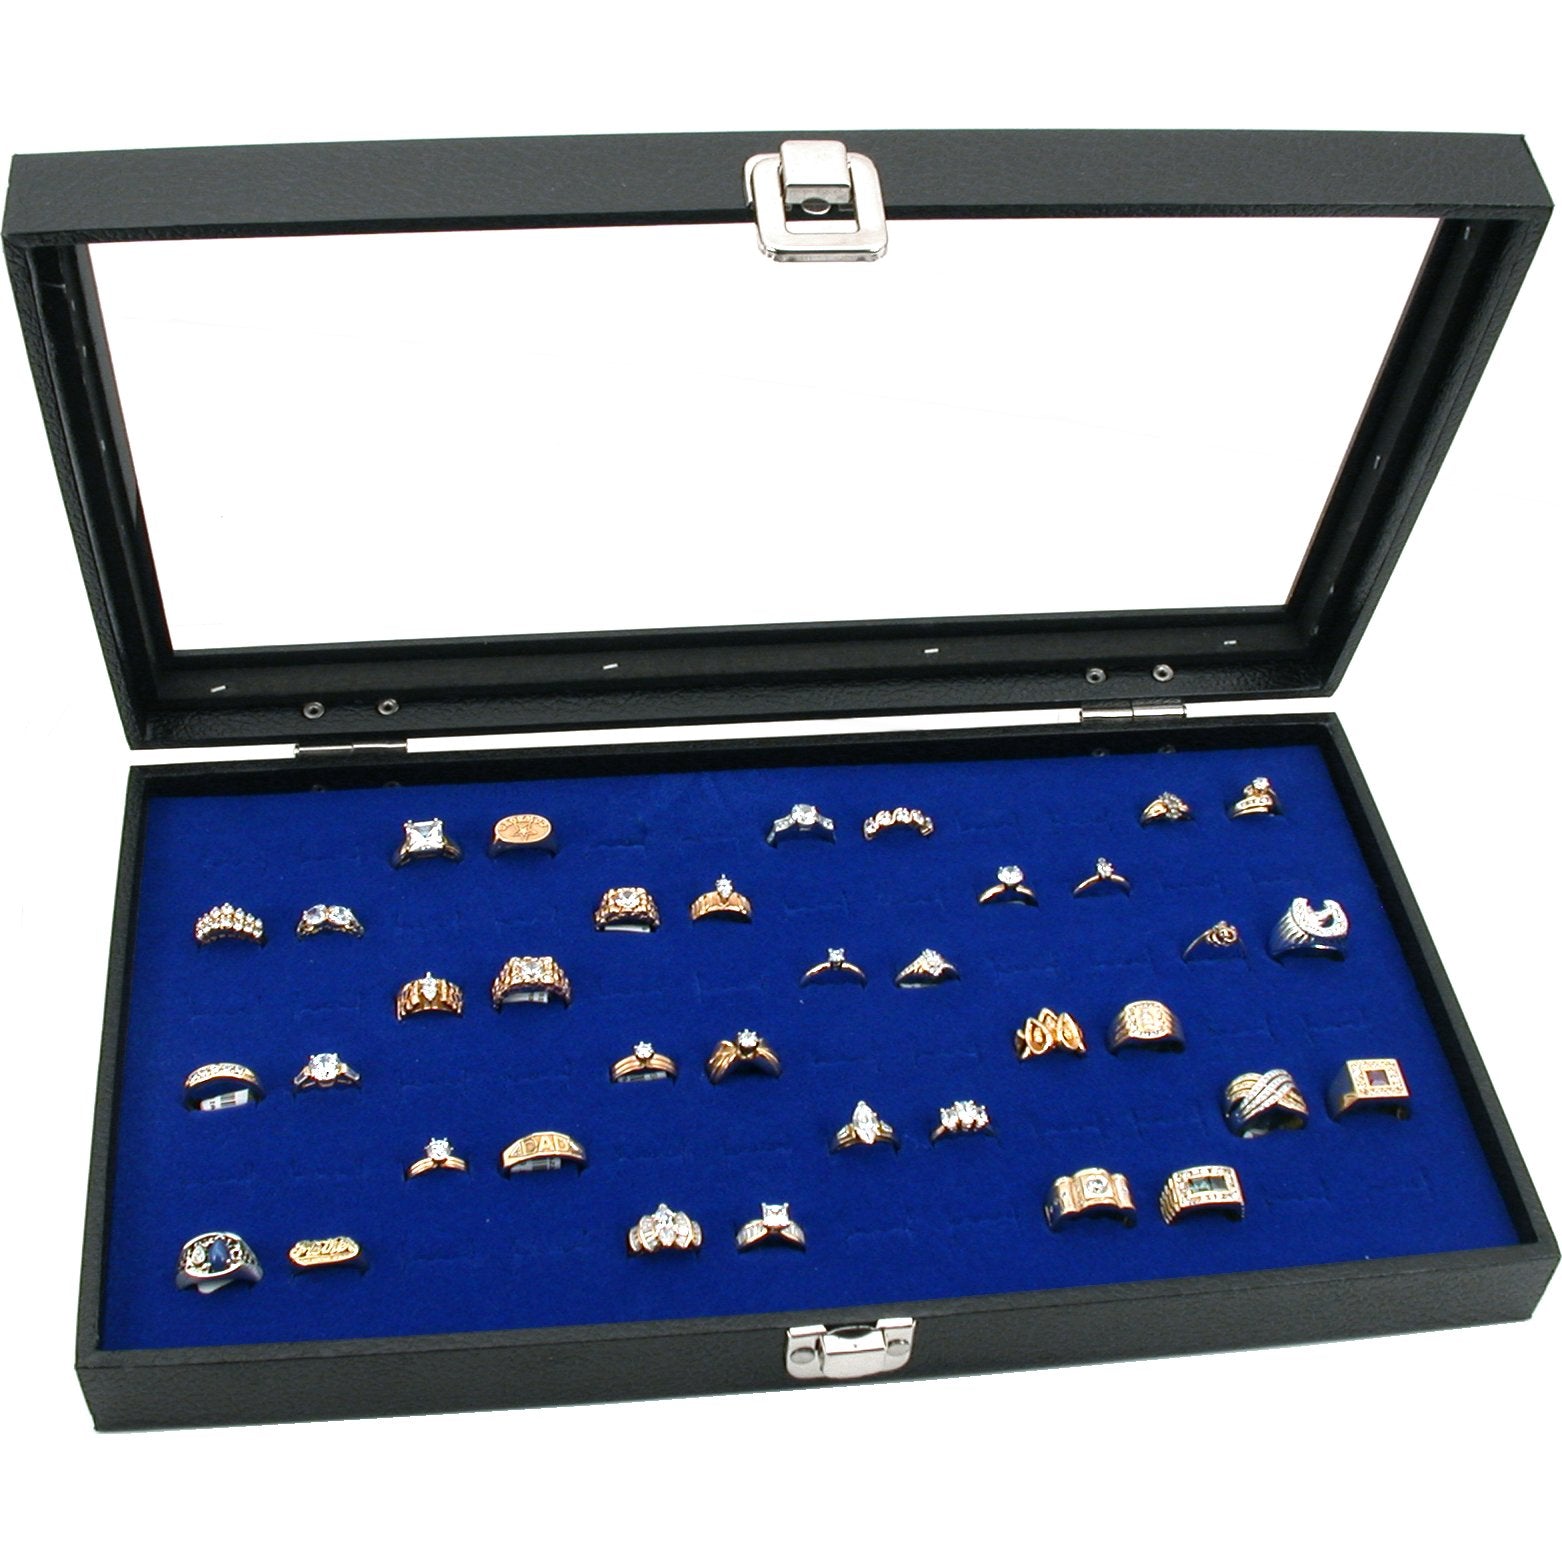 Inserts for Jewellery Boxes & Cases